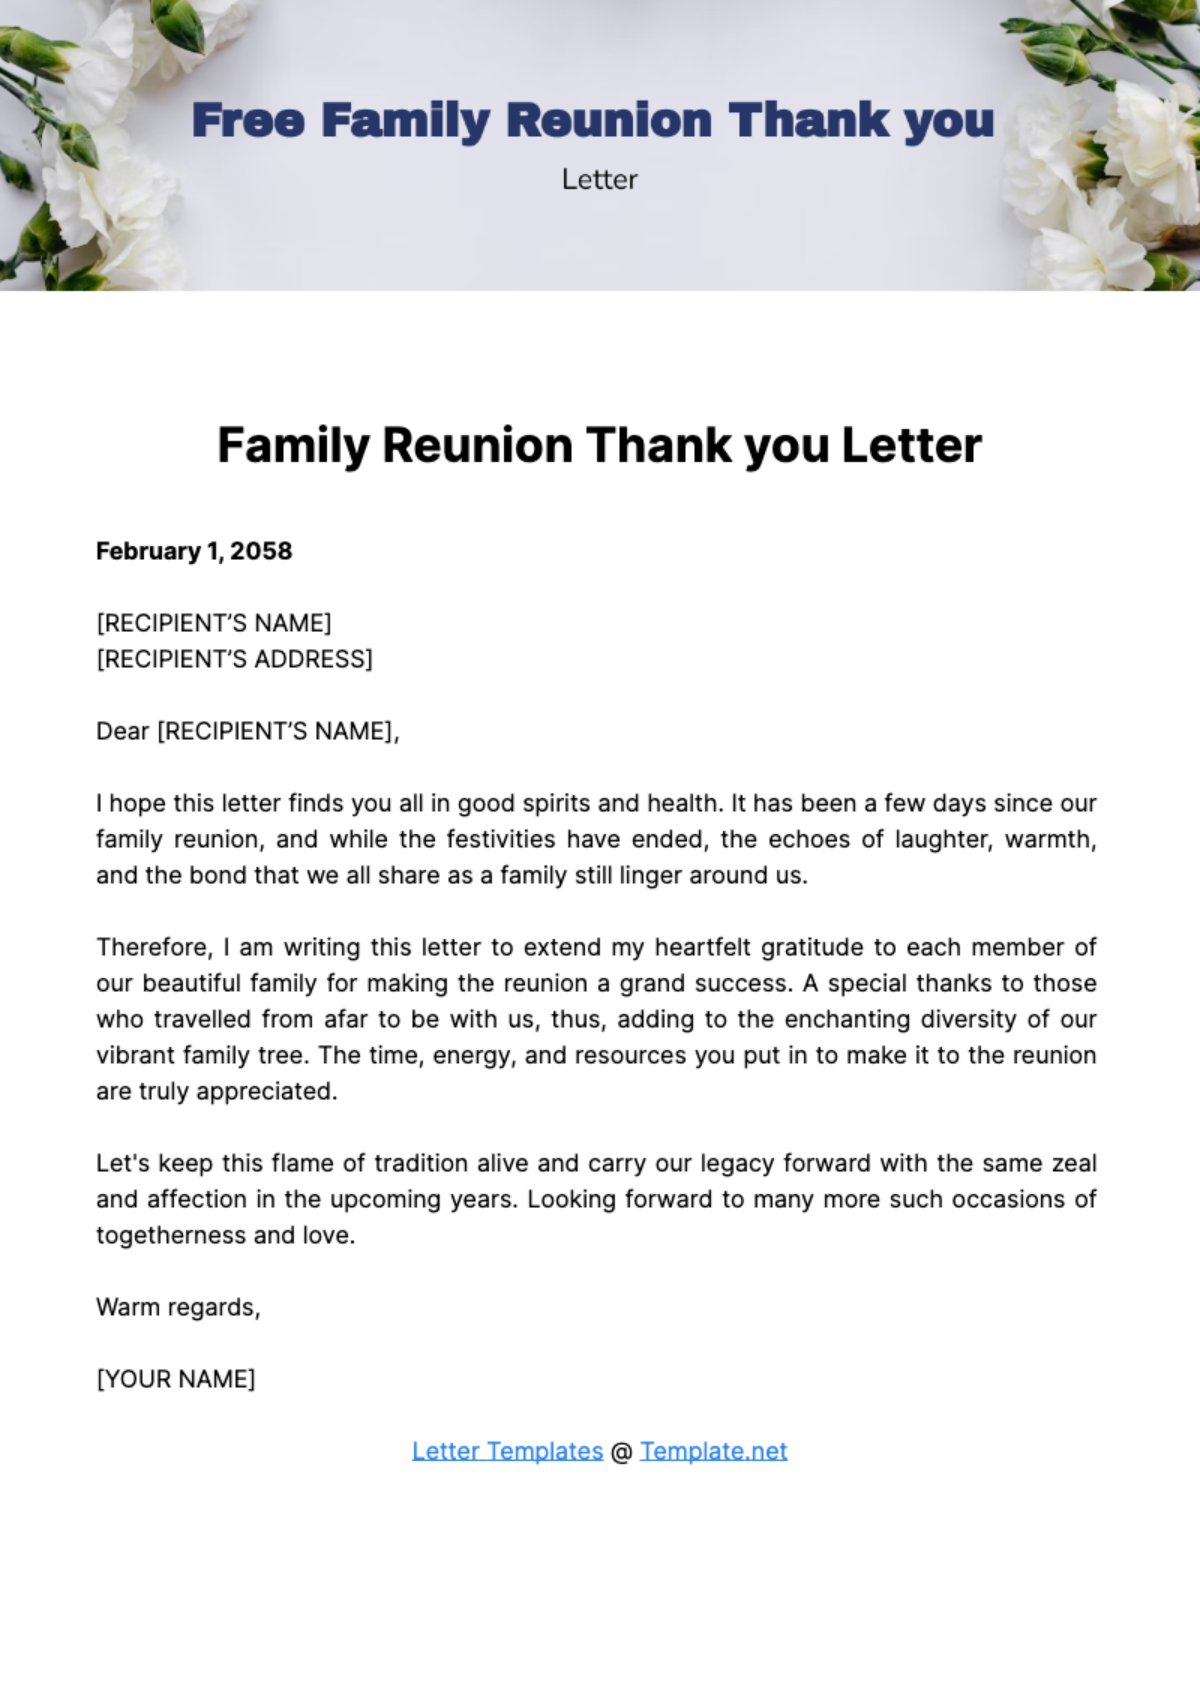 Free Family Reunion Thank you Letter Template